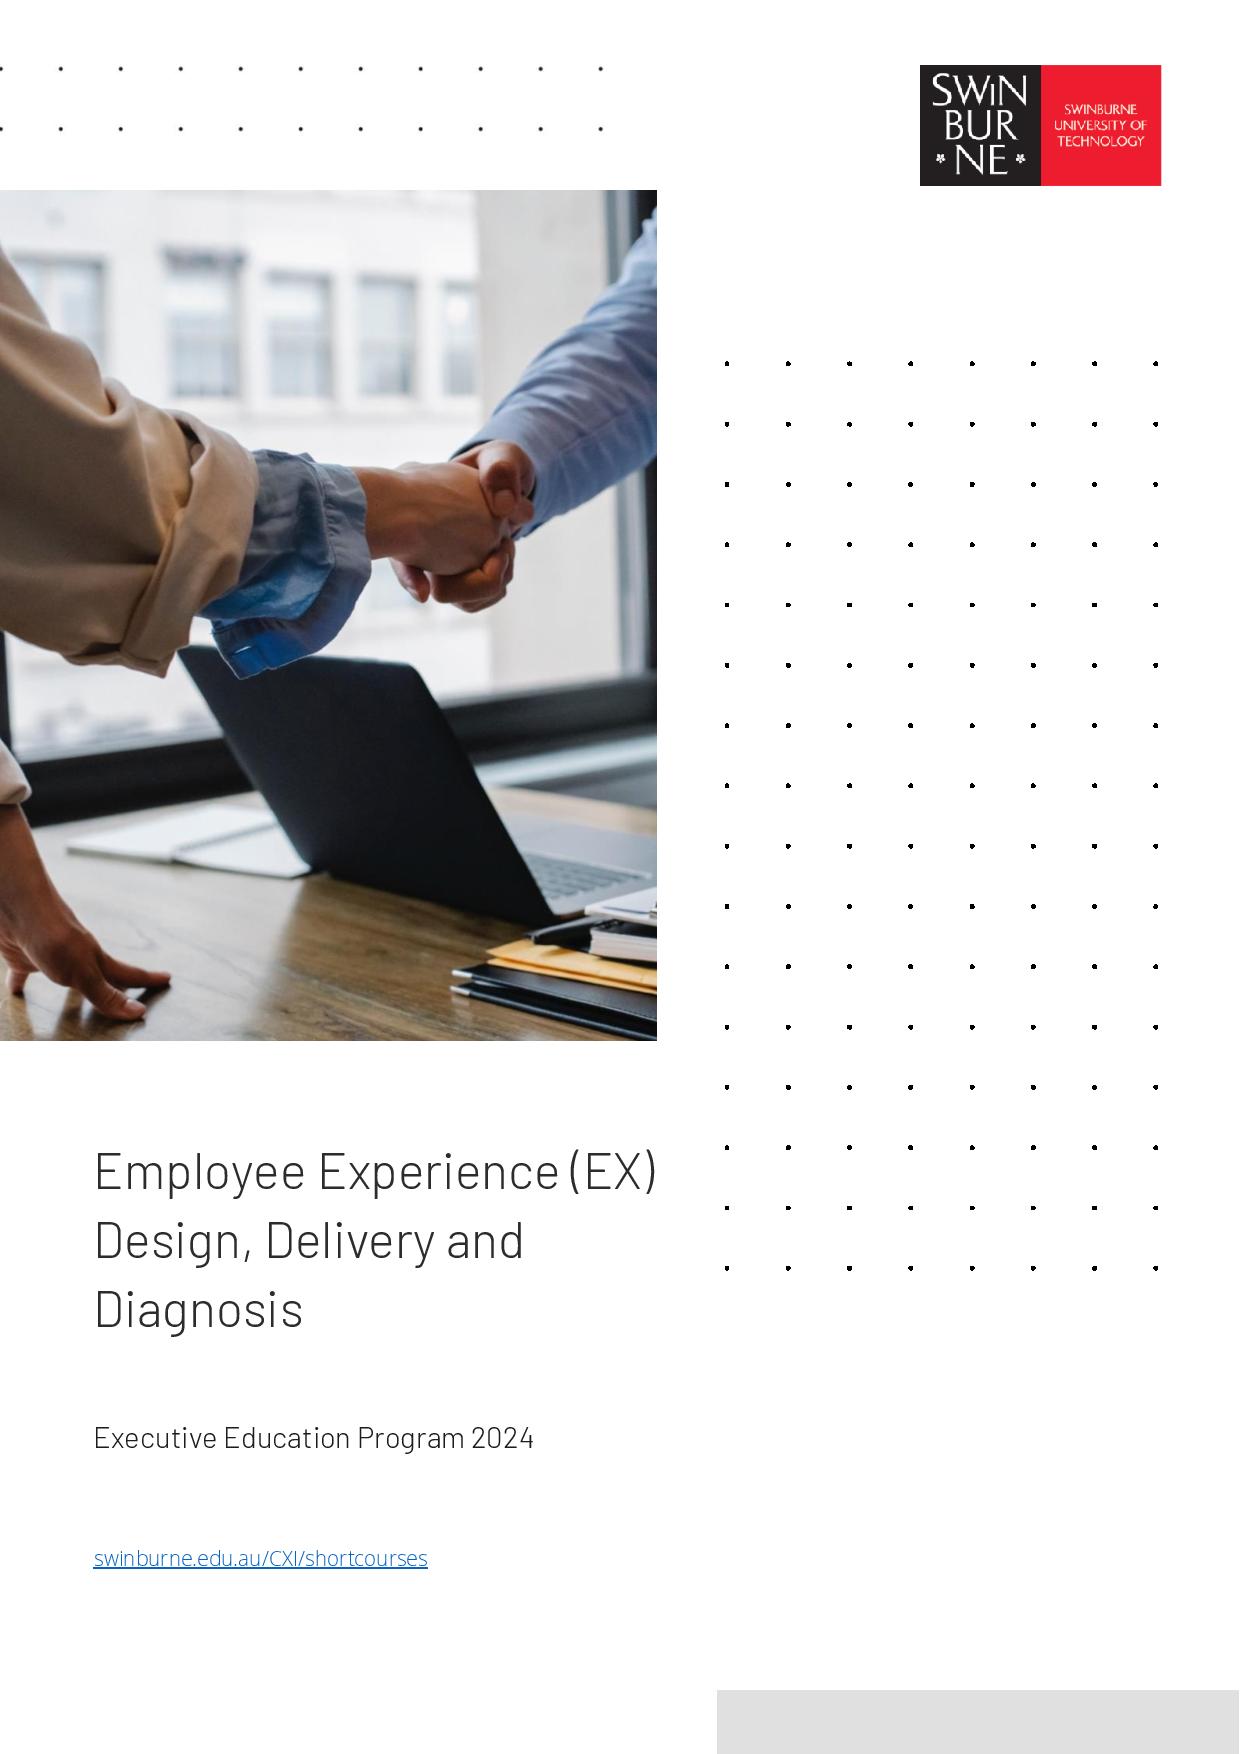 Employee Experience (EX) Design, Delivery and Diagnosis